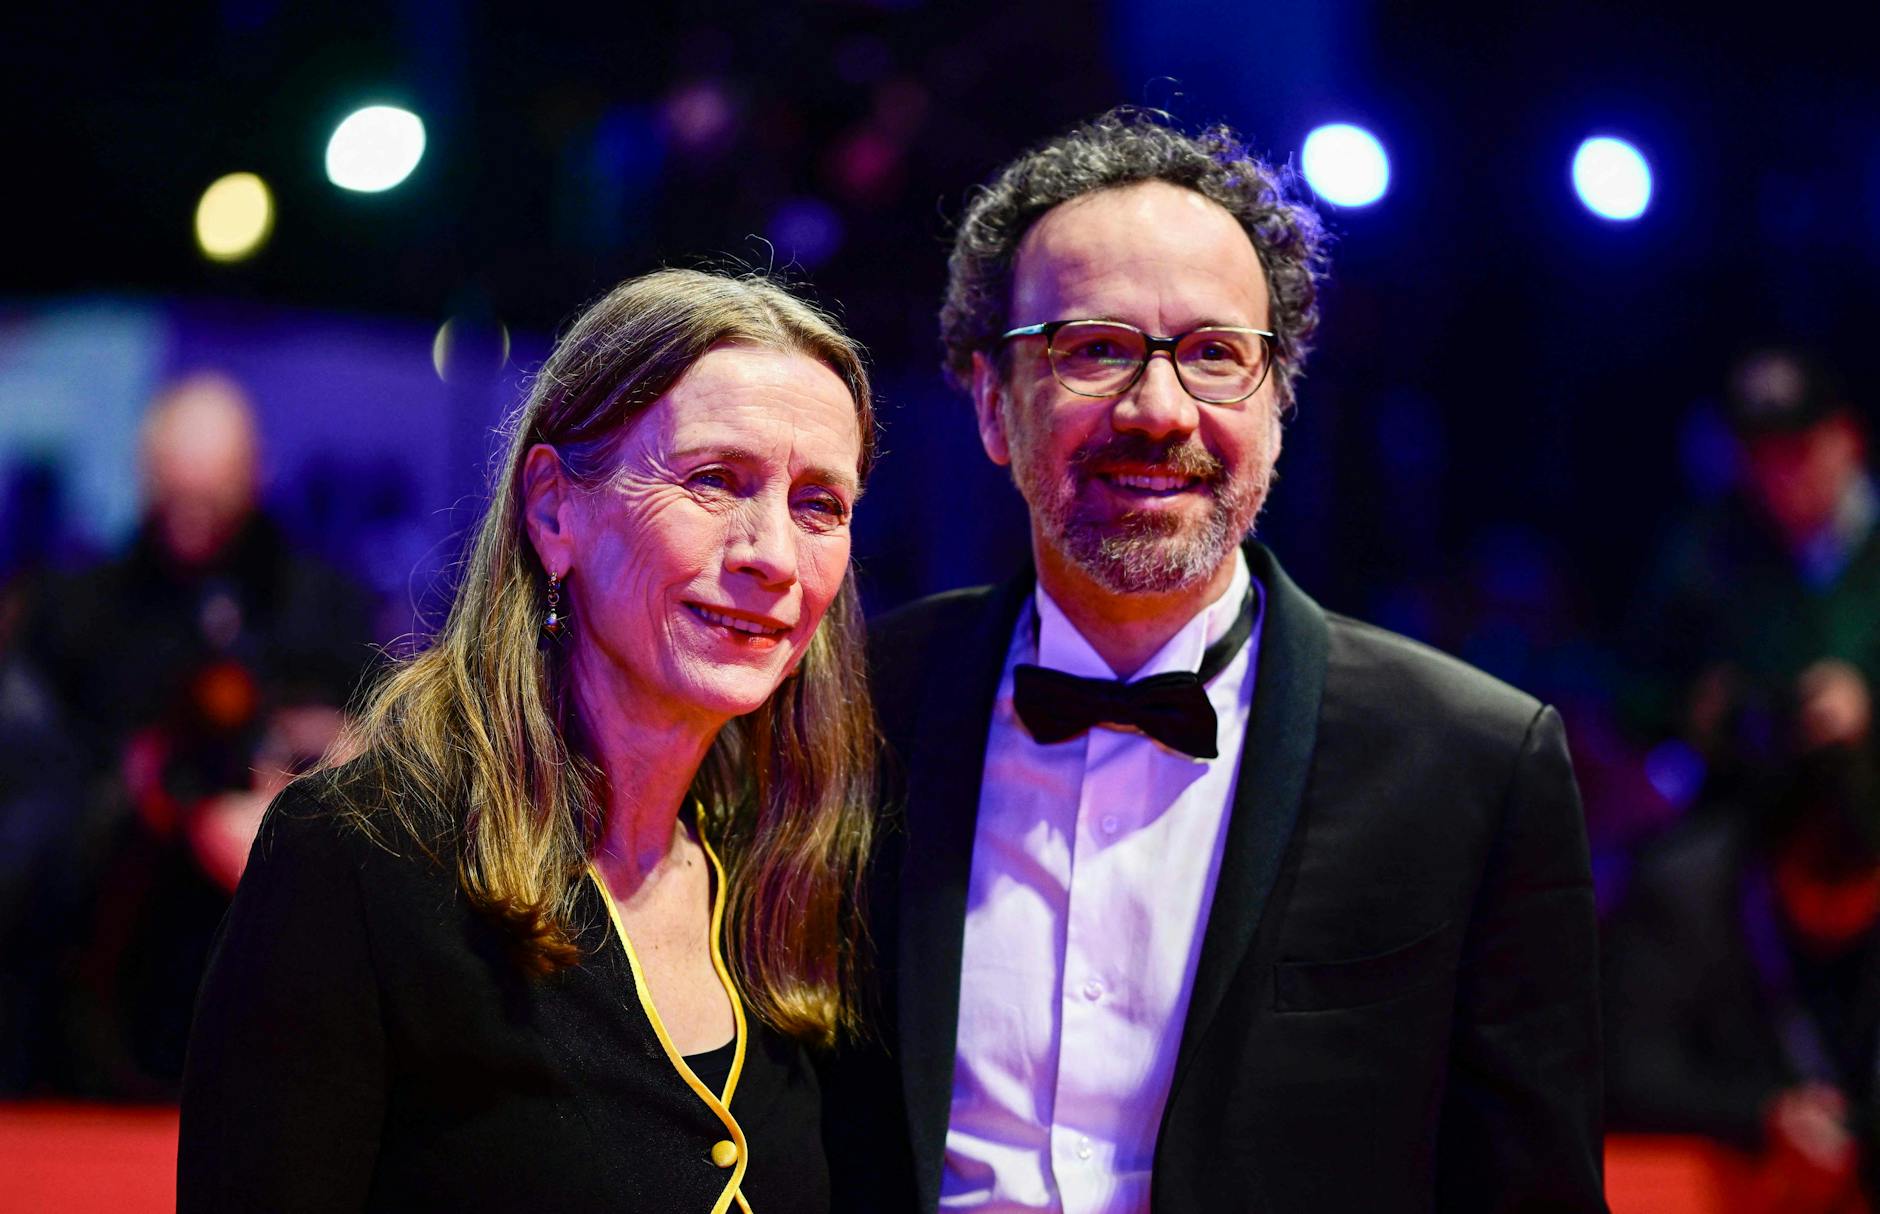 Berlinale bosses Mariette Rissenbeek and Carlo Chatrian on the red carpet